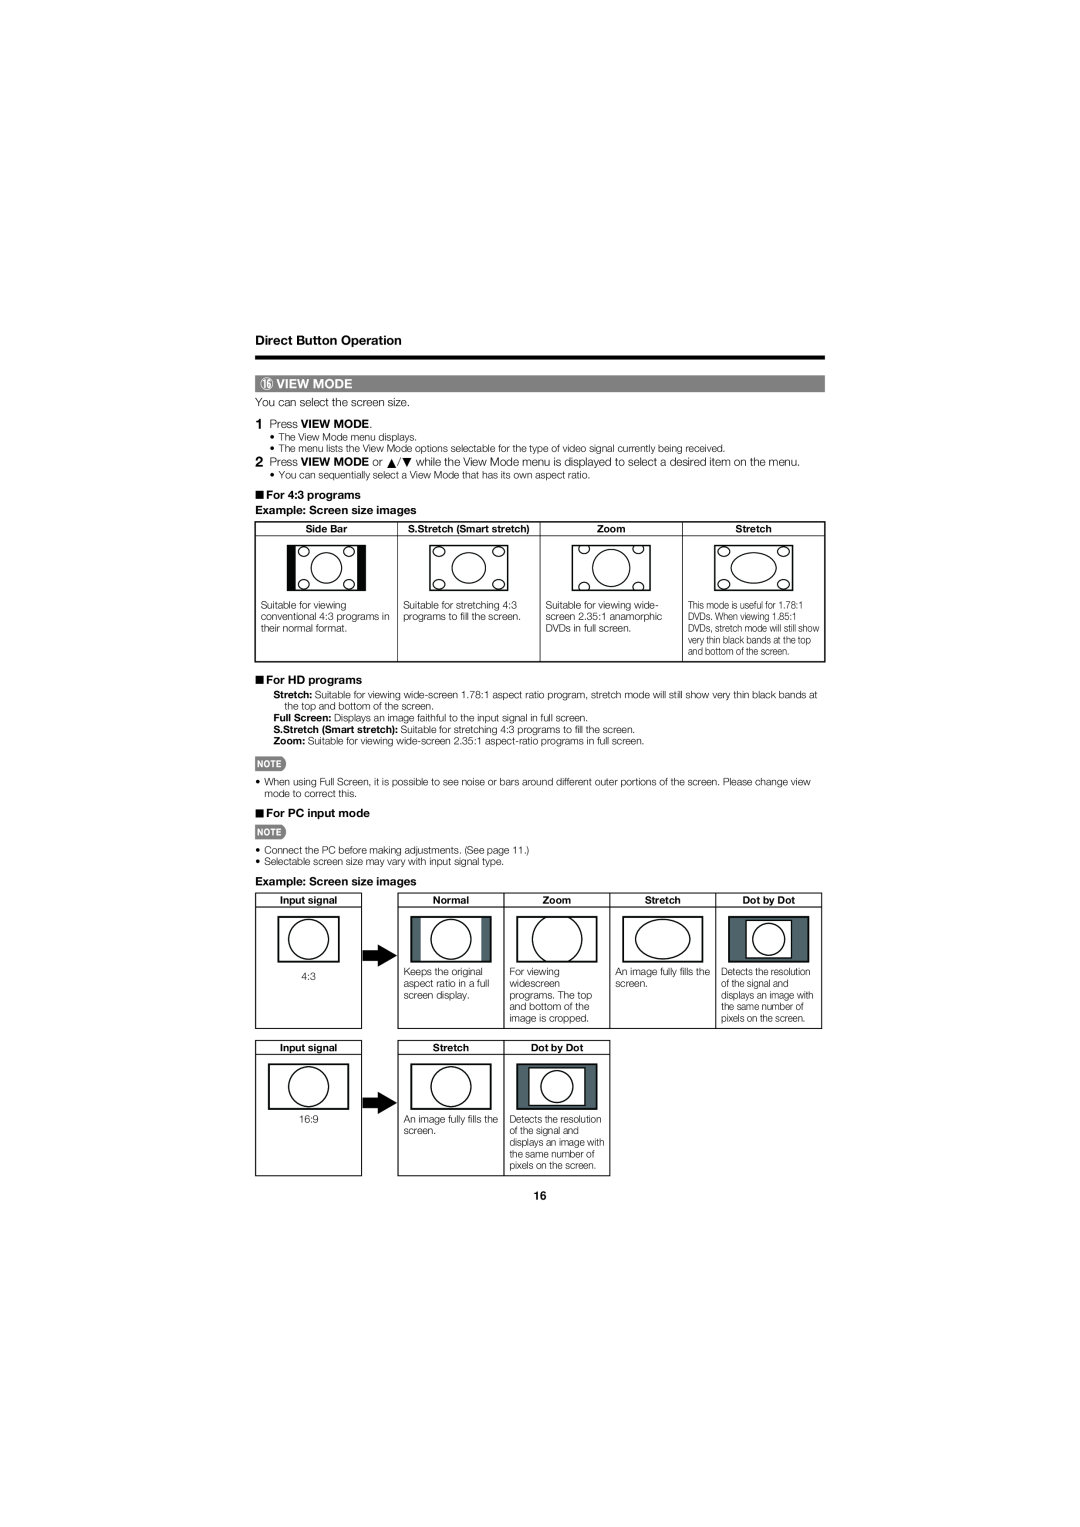 Sharp LC32D47UT View Mode, You can select the screen size, Press VIEW MODE, For HD programs, For PC input mode, Side Bar 